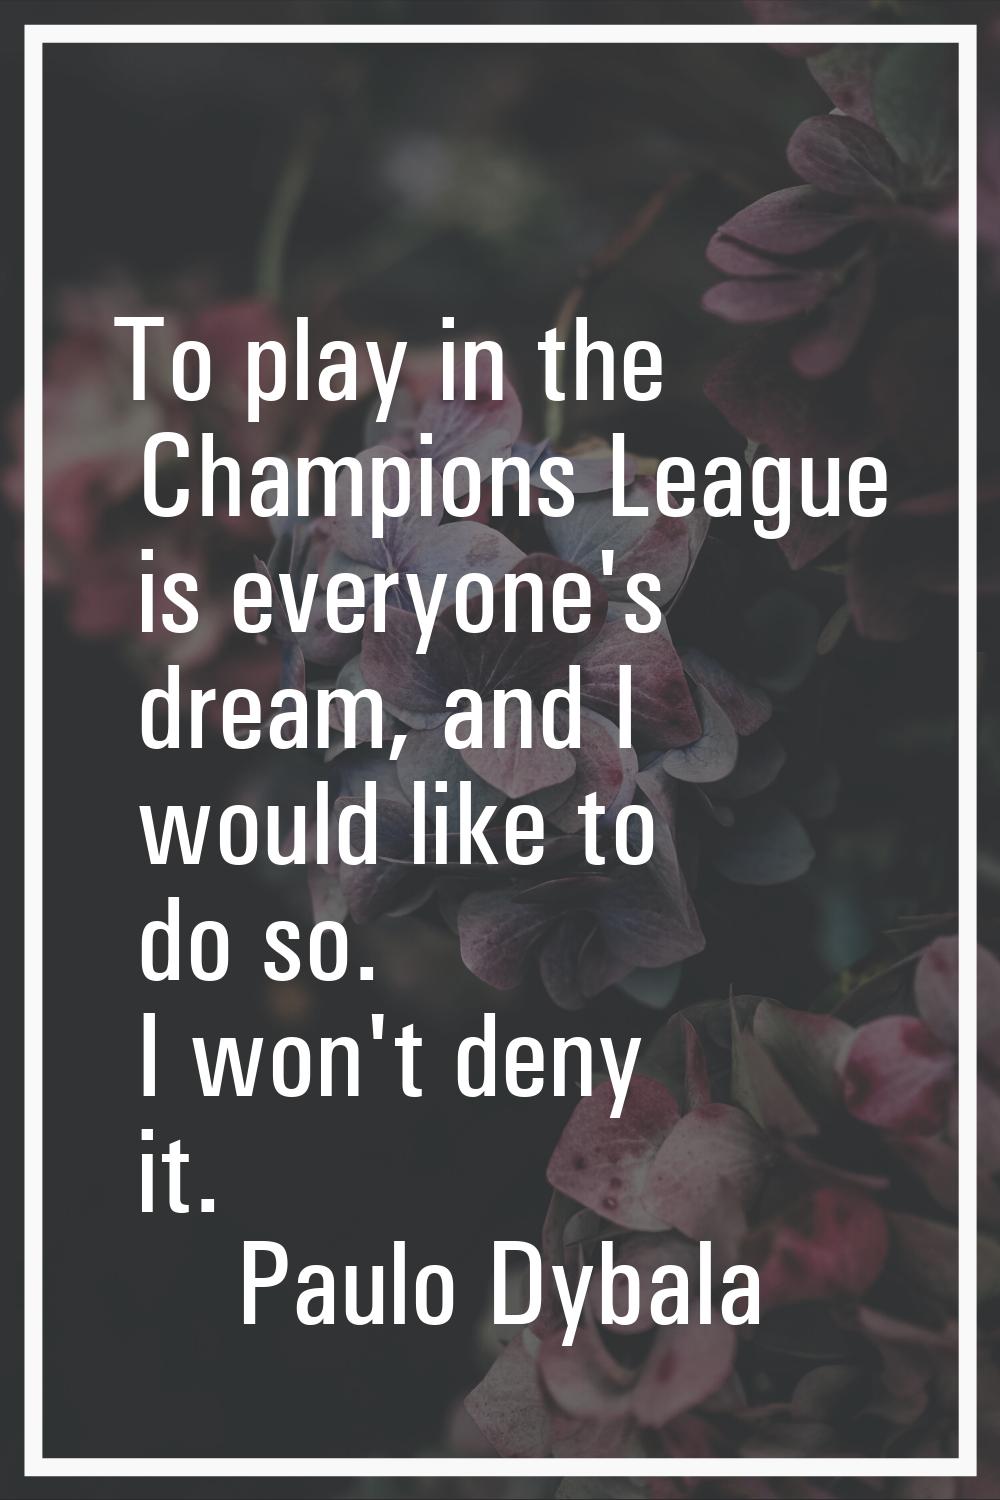 To play in the Champions League is everyone's dream, and I would like to do so. I won't deny it.